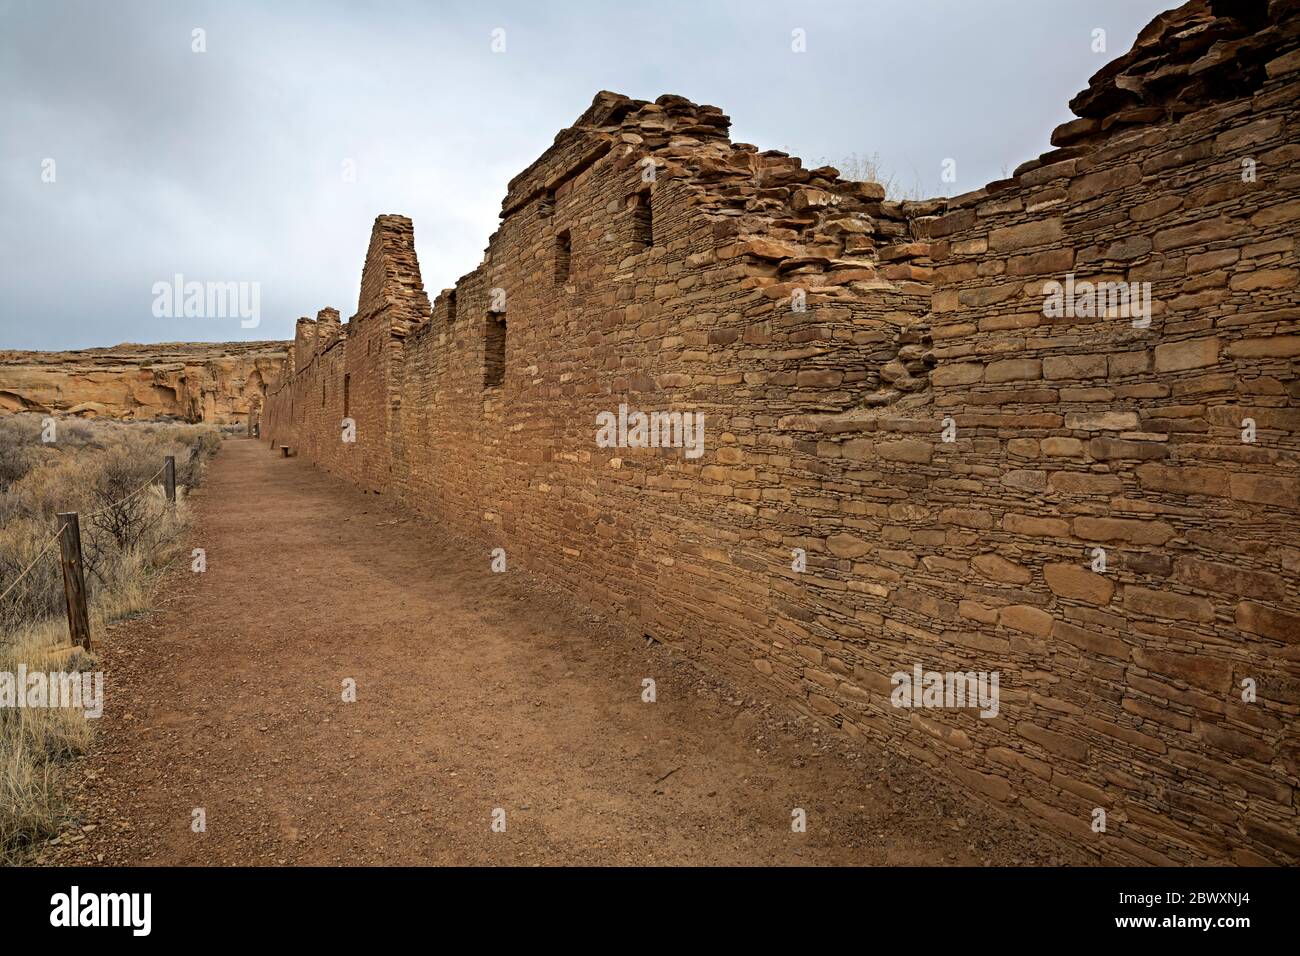 NM00439-00...NEW MEXICO - Outer wall of the Chetro Ketl great house in the Chaco Culture National Historical Park; a World Heritage Site. Stock Photo